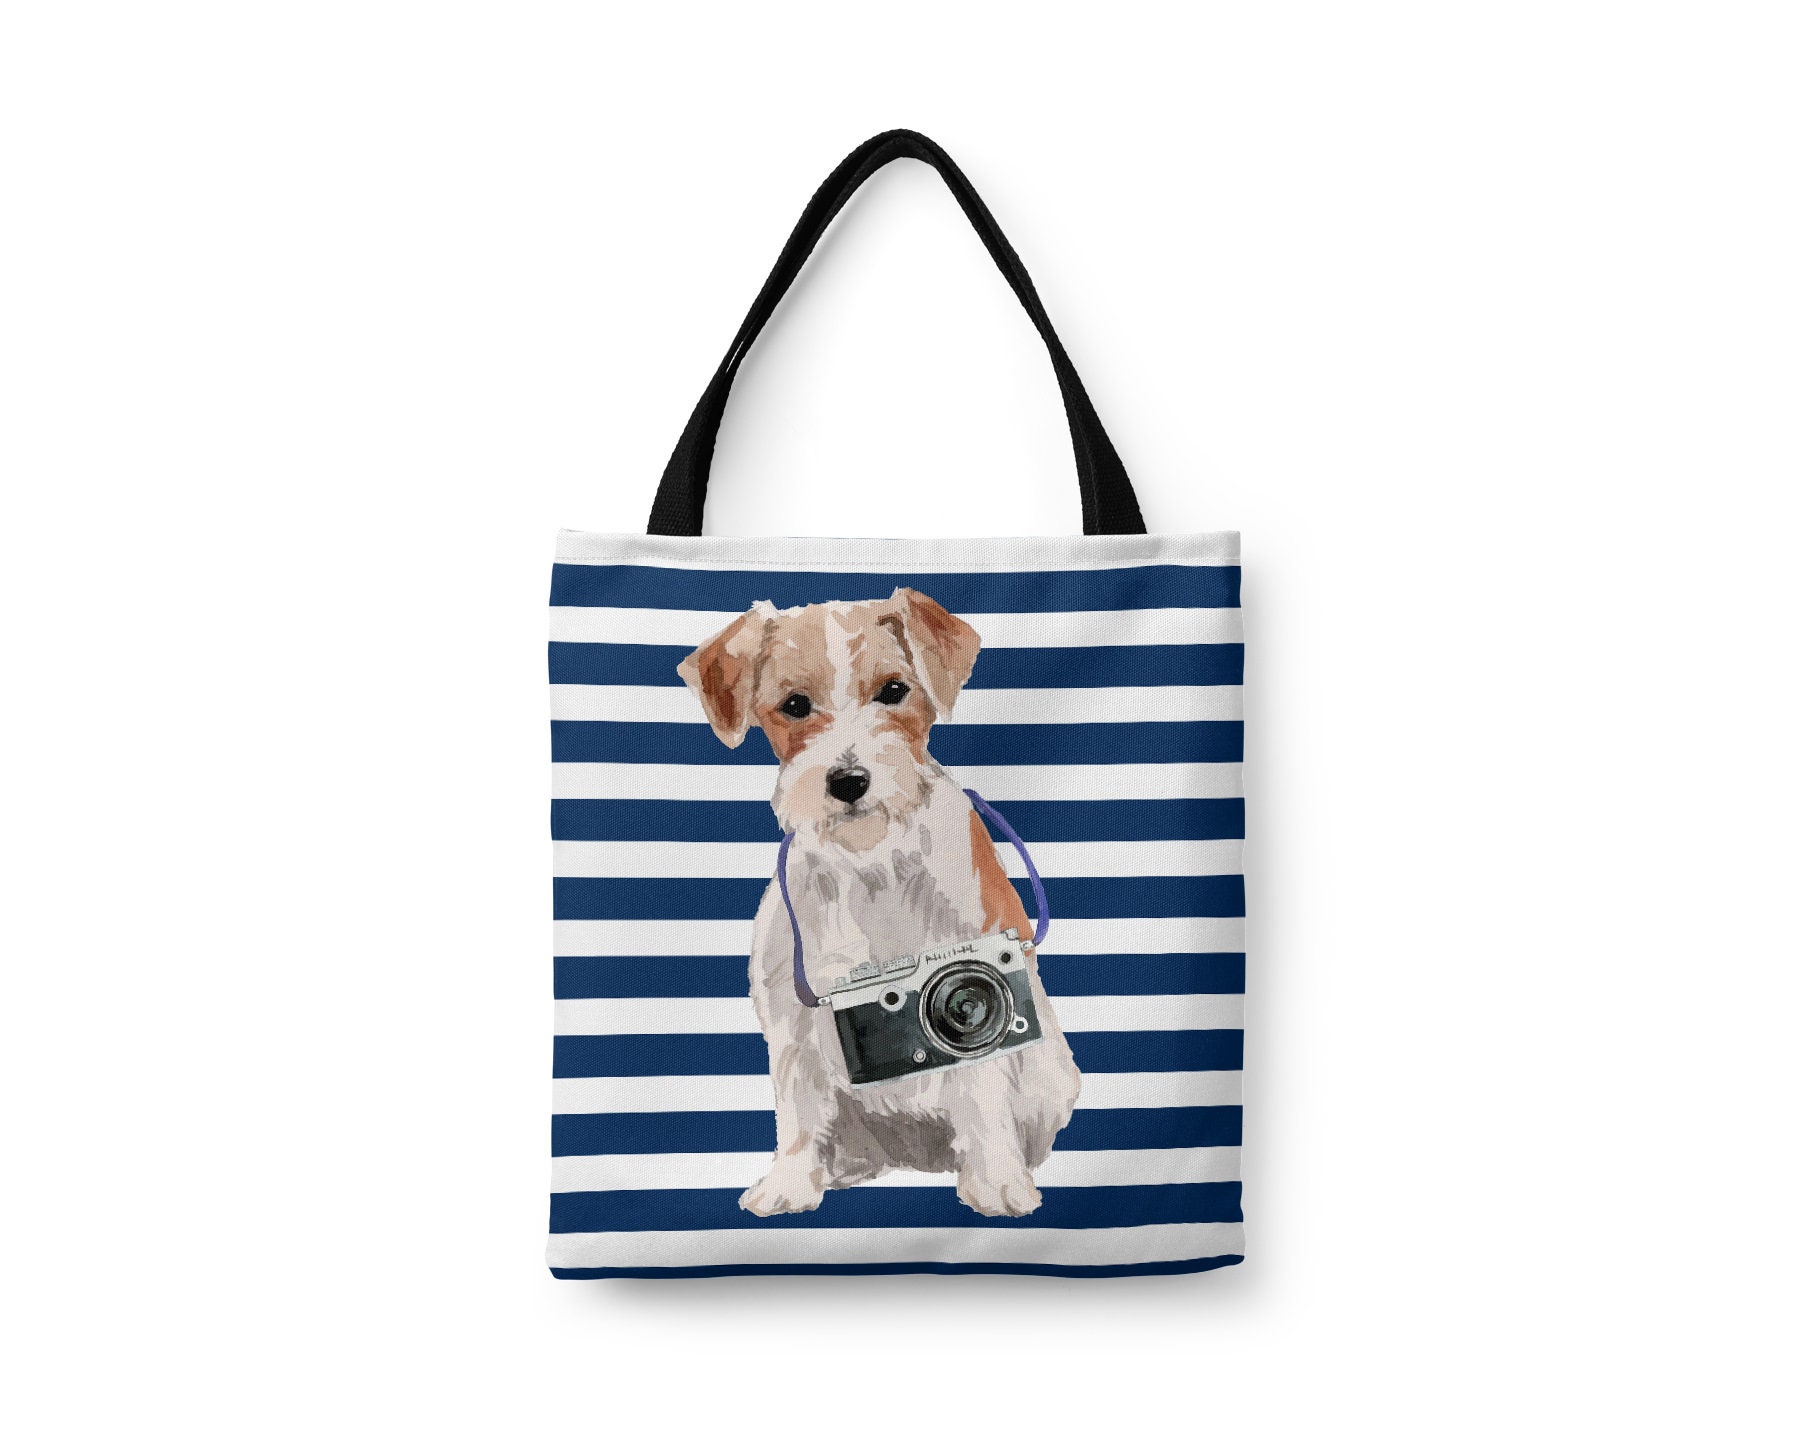 Jack Russel Dog Tote Bag - Illustrated Dogs & 6 Travel Inspired Styles. All Purpose For Work, Shopping, Life. Jrt, Russell Terrier